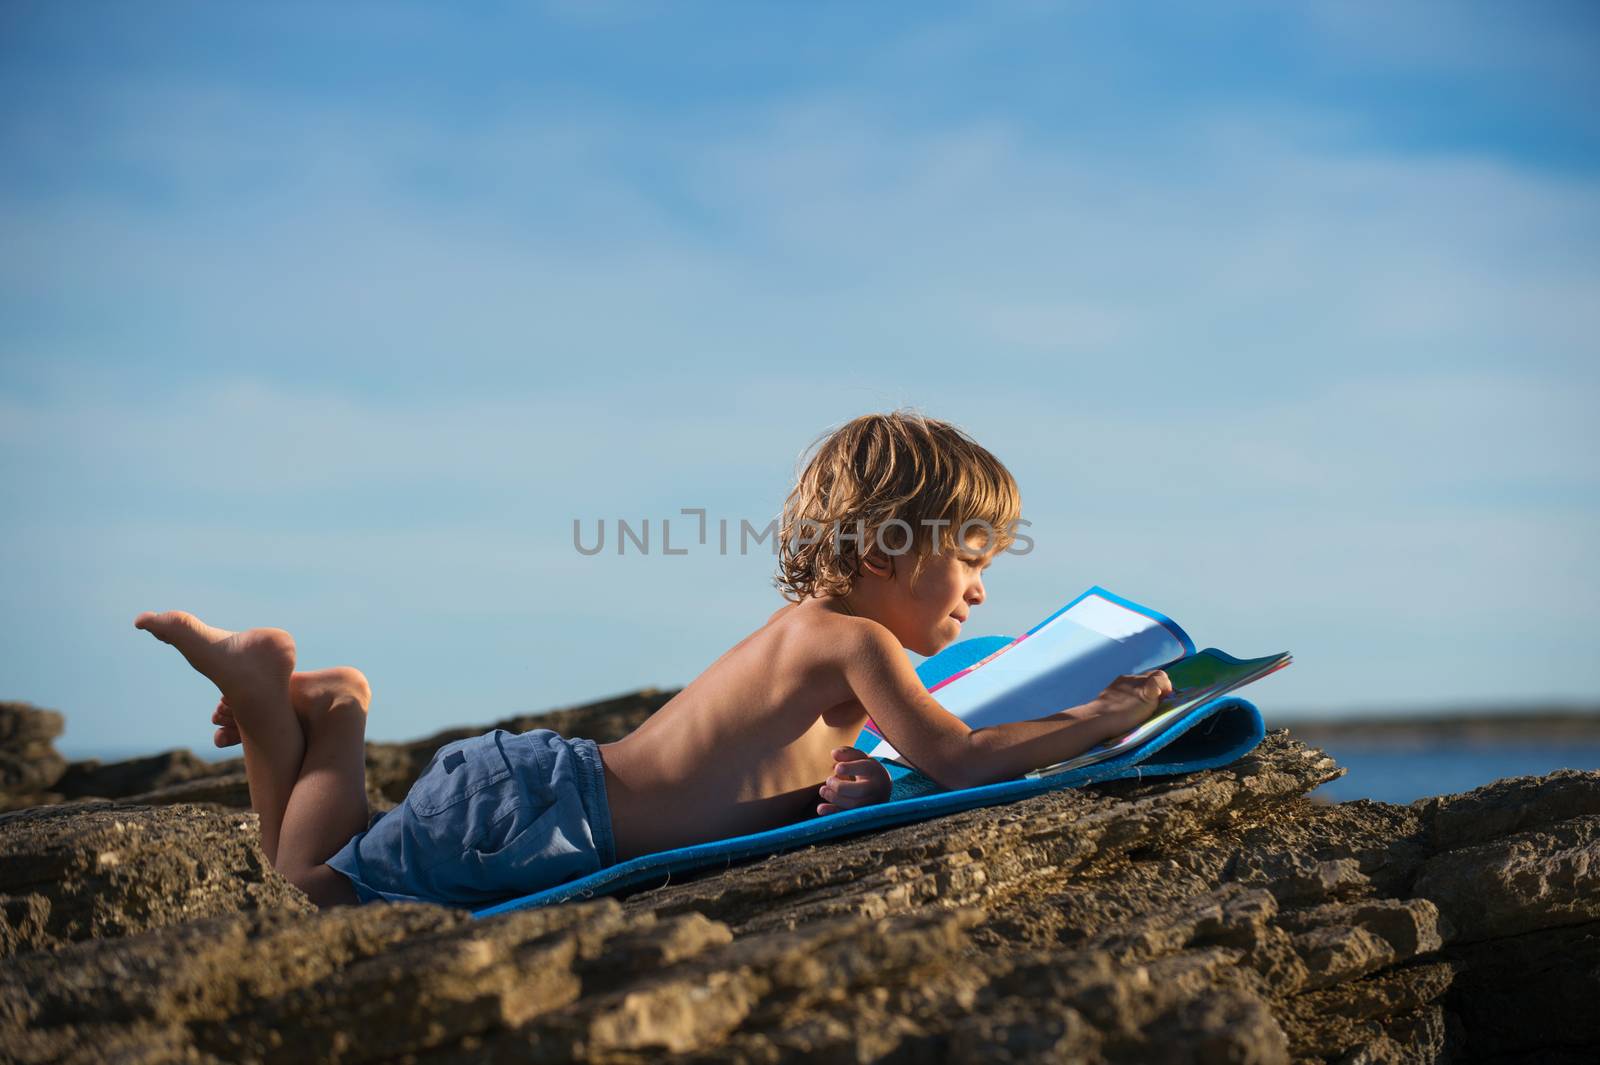 Cute little boy lying on his stomach looking at the picture book on the beach. Somen negative space around.